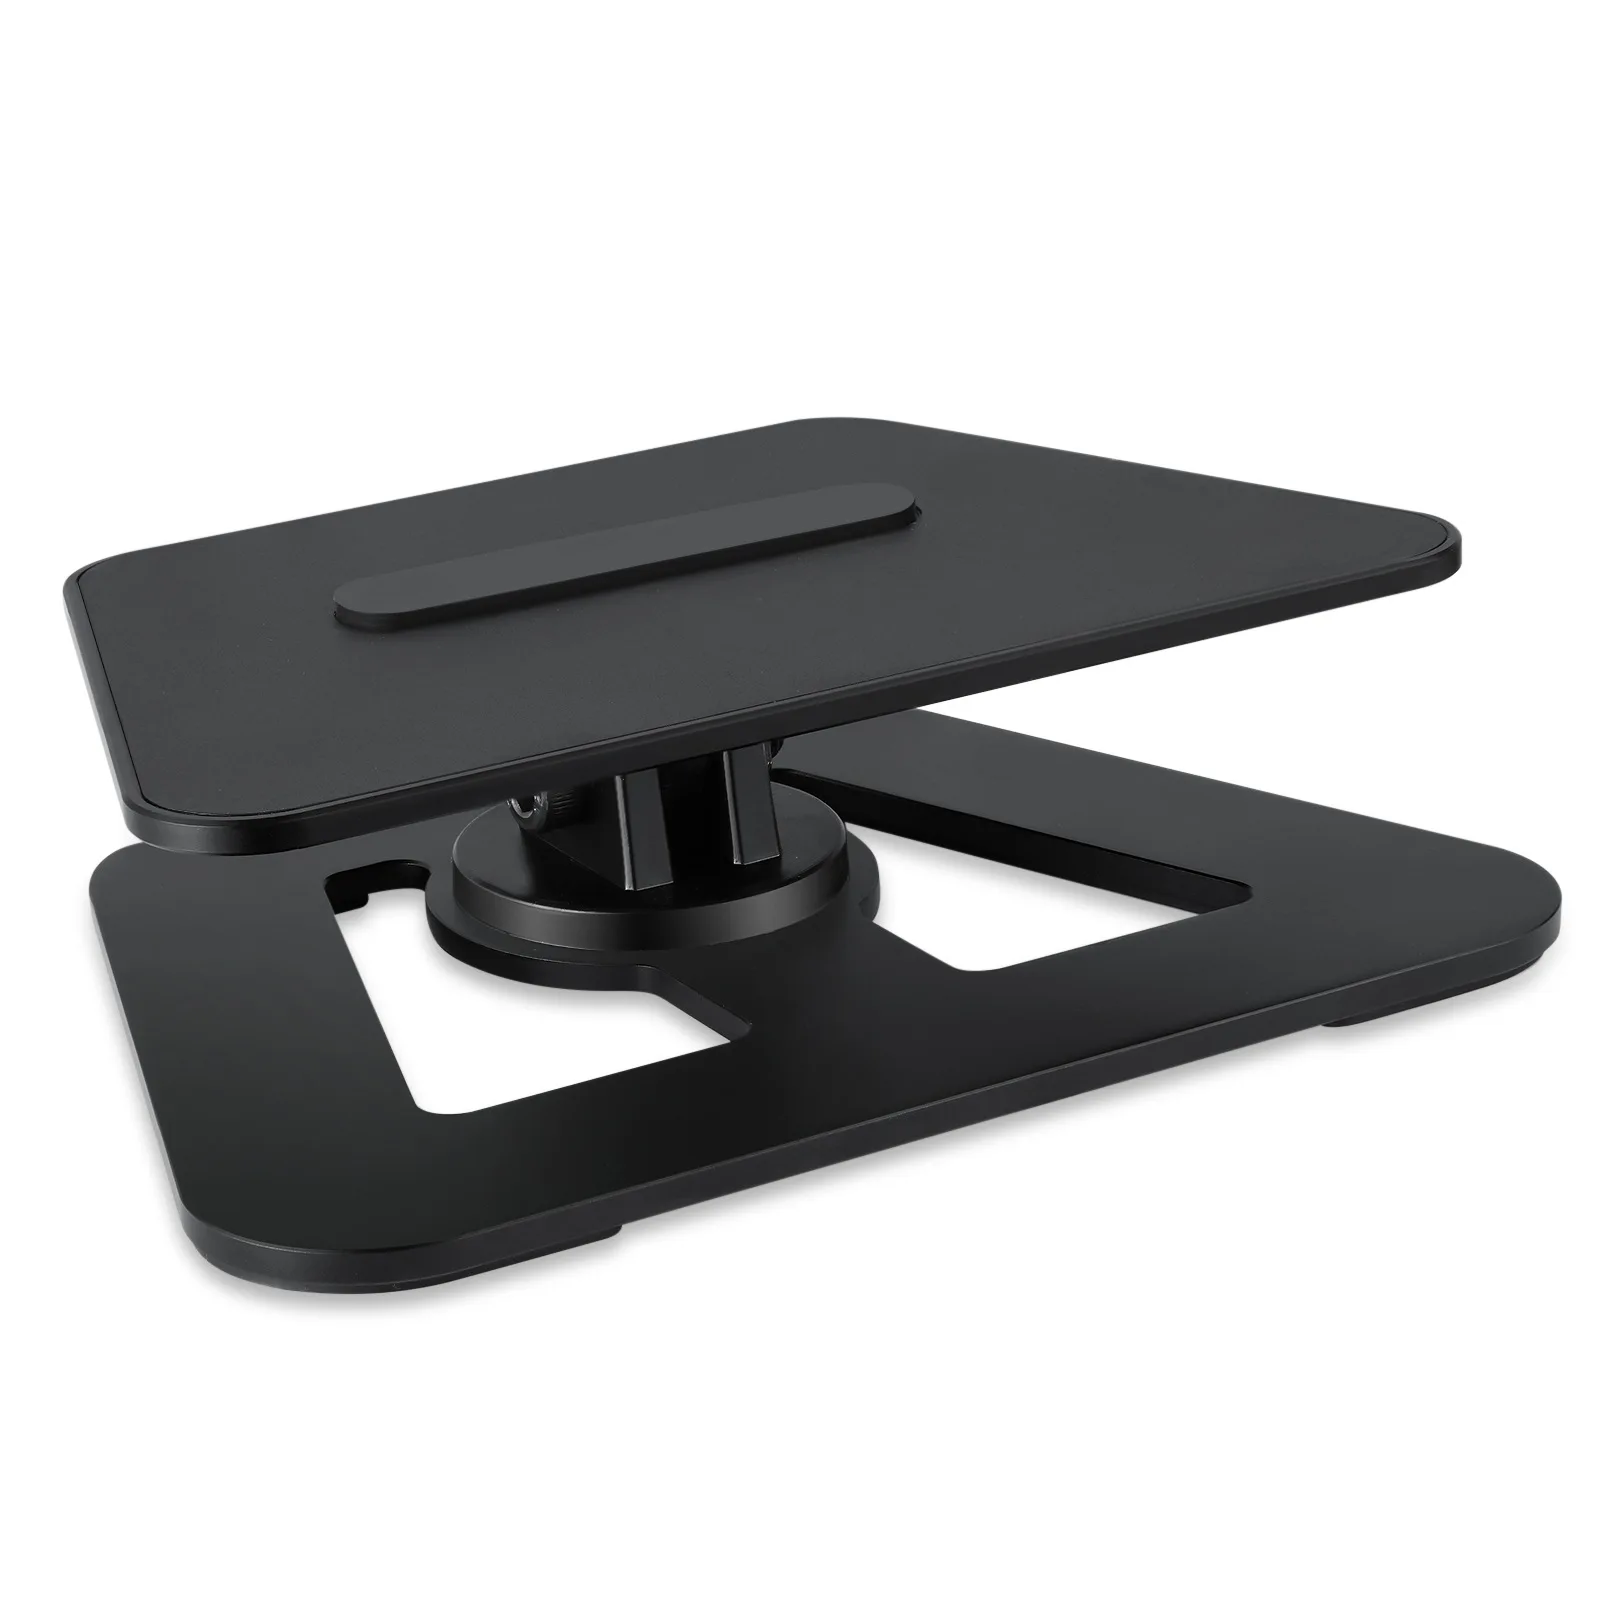 Adjustable Magnetic Stand Accessories for  Echo Show 5 with 360 Degree Swivel Rotation and Tilt Function White 